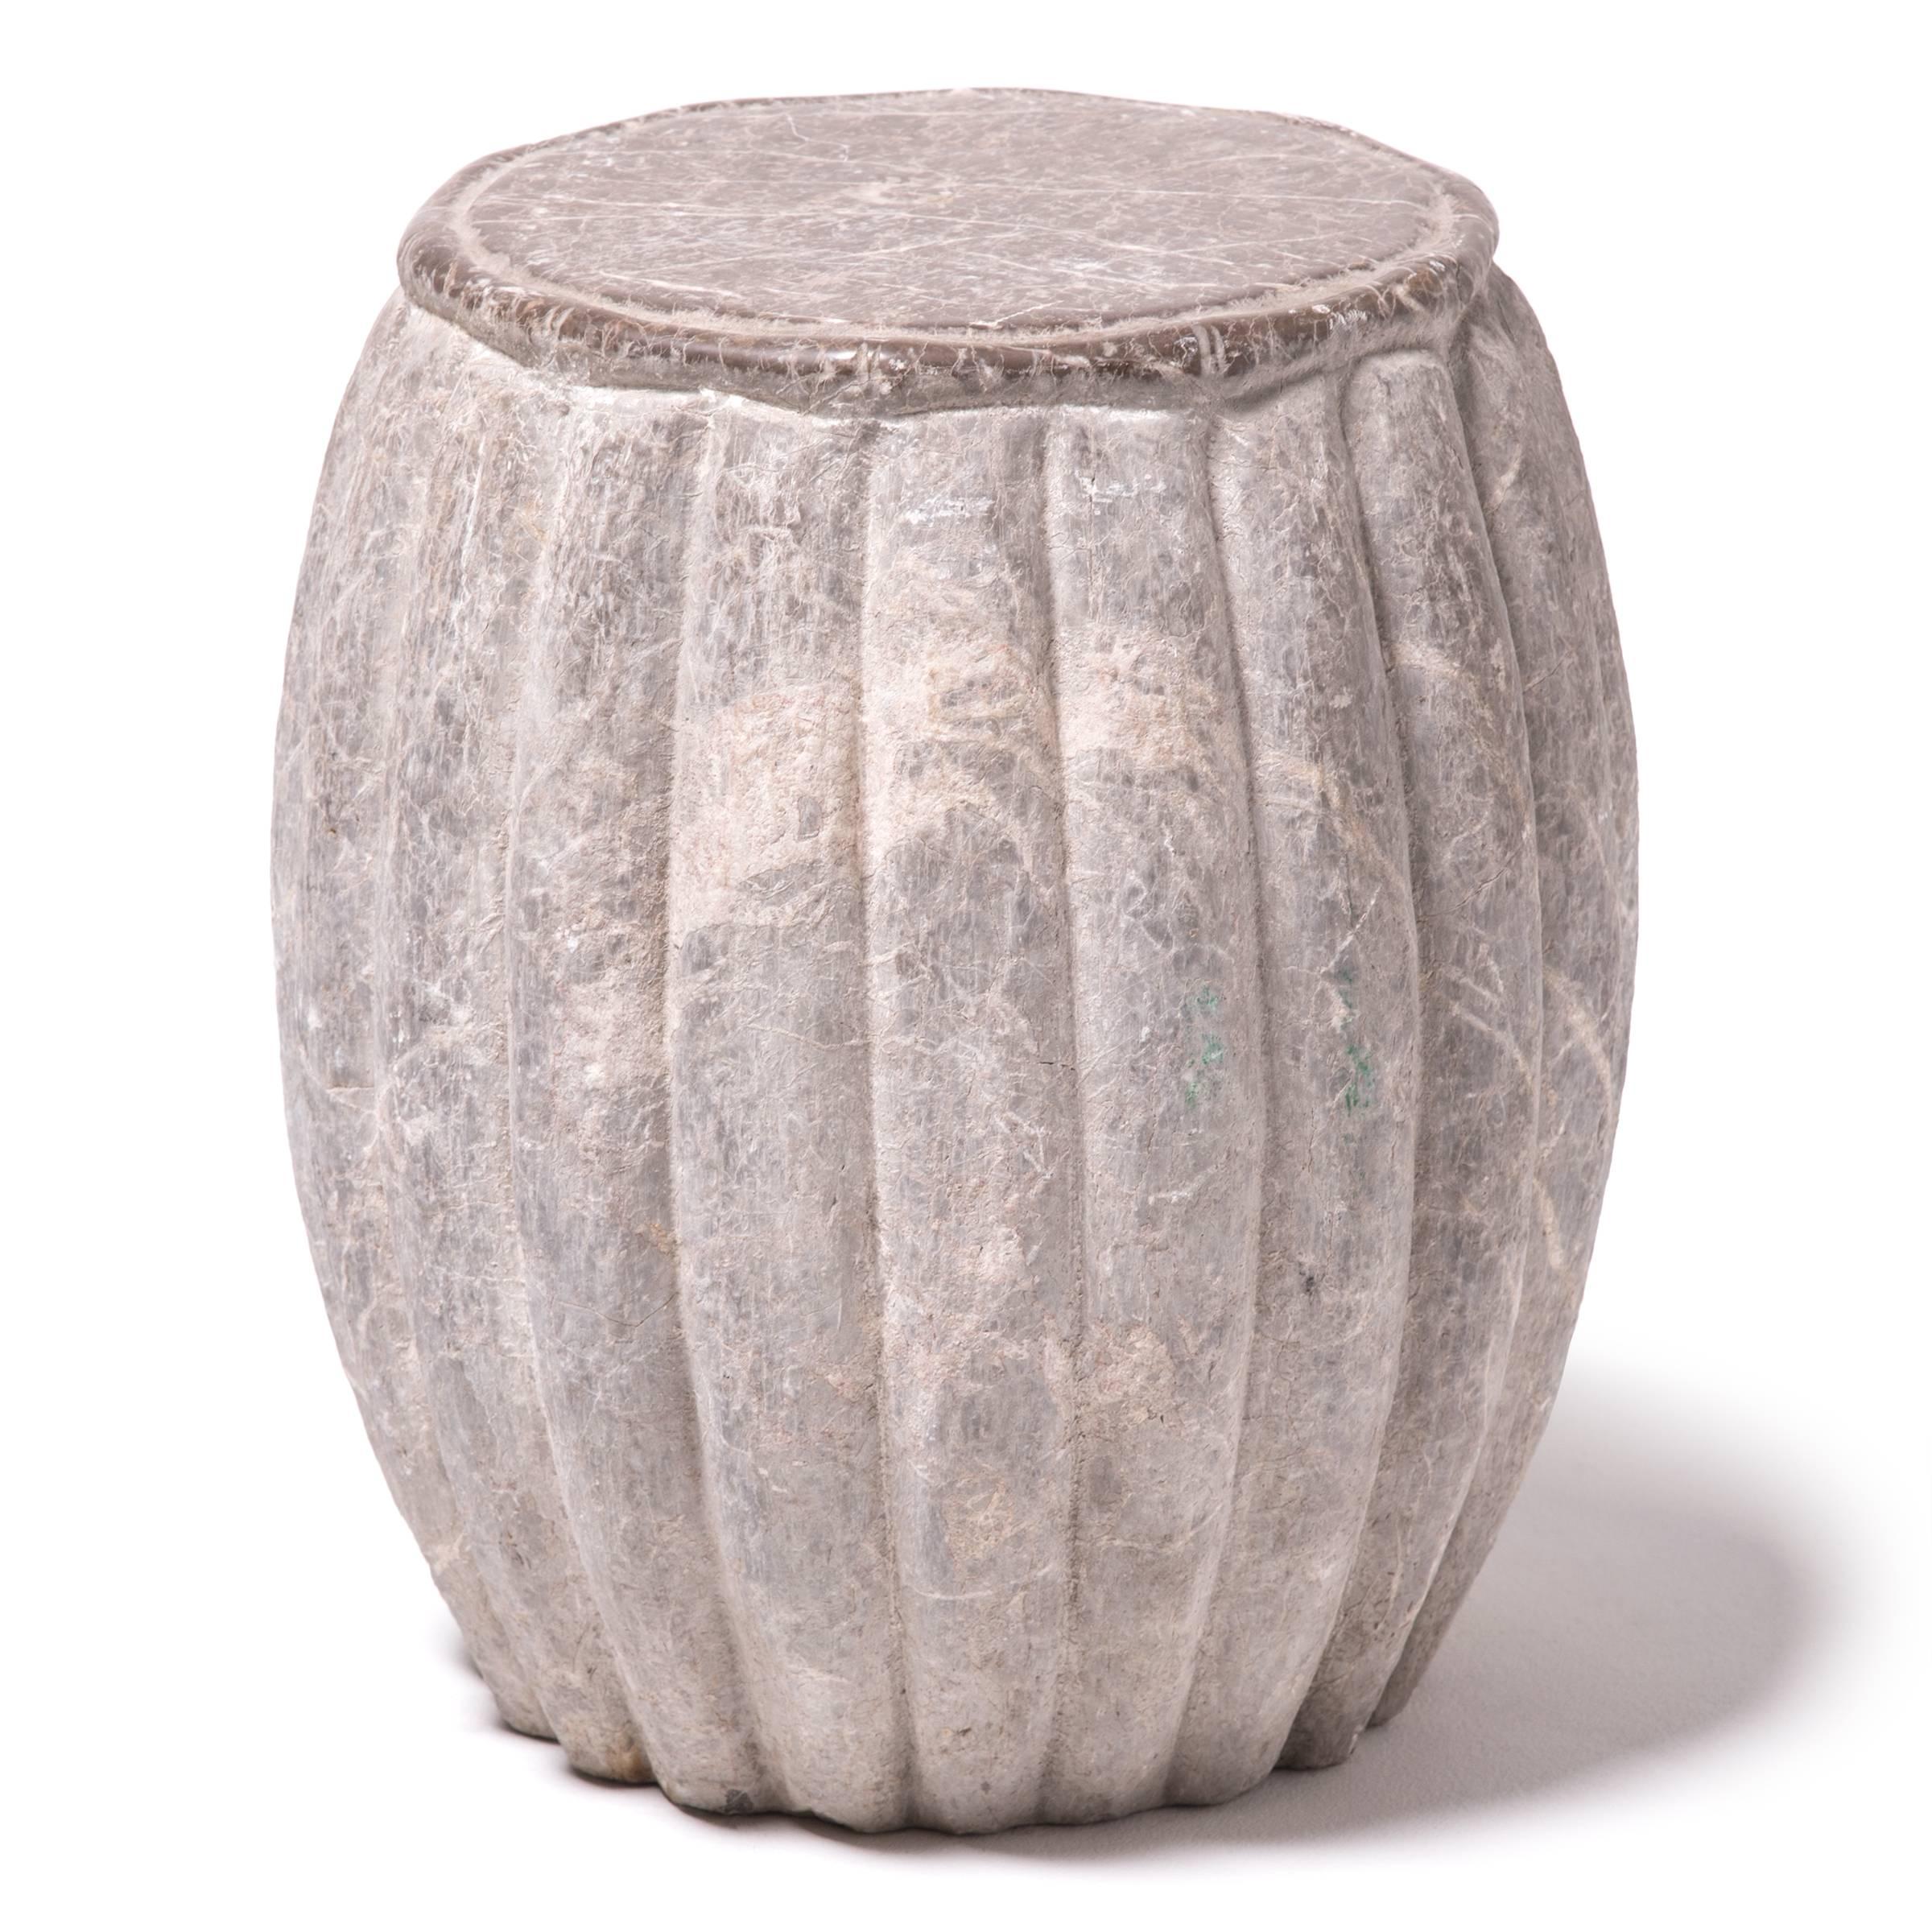 Marked by expressive veining, this handsome table was carved in China’s Shanxi province out of a piece of solid limestone. Ribbed and rounded, the form suggests a melon, an ancient Chinese symbol of perpetuity. Traditionally used in a garden as a